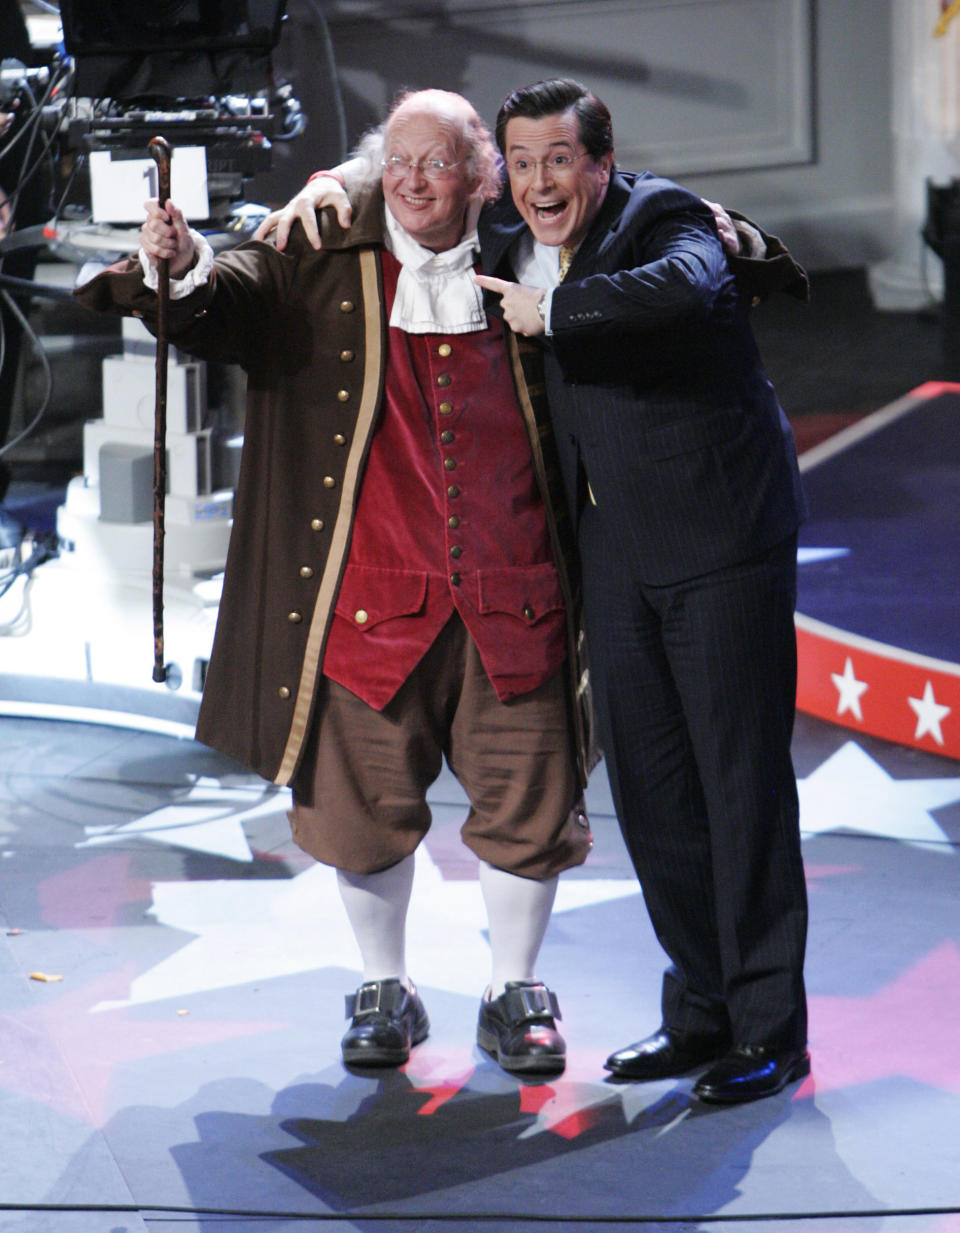 FILE – In this April 17, 2008, file photo, television host Stephen Colbert, right, of Comedy Central's "The Colbert Report" points at re-enactor Ralph Archbold, left, portraying Benjamin Franklin, after the recording of the program at the University of Pennsylvania in Philadelphia. Archbold, who portrayed Franklin in Philadelphia for more than 40 years, died Saturday, March 25, 2017, at age 75, according to the Alleva Funeral Home in Paoli, Pa. (AP Photo/Matt Rourke, File)